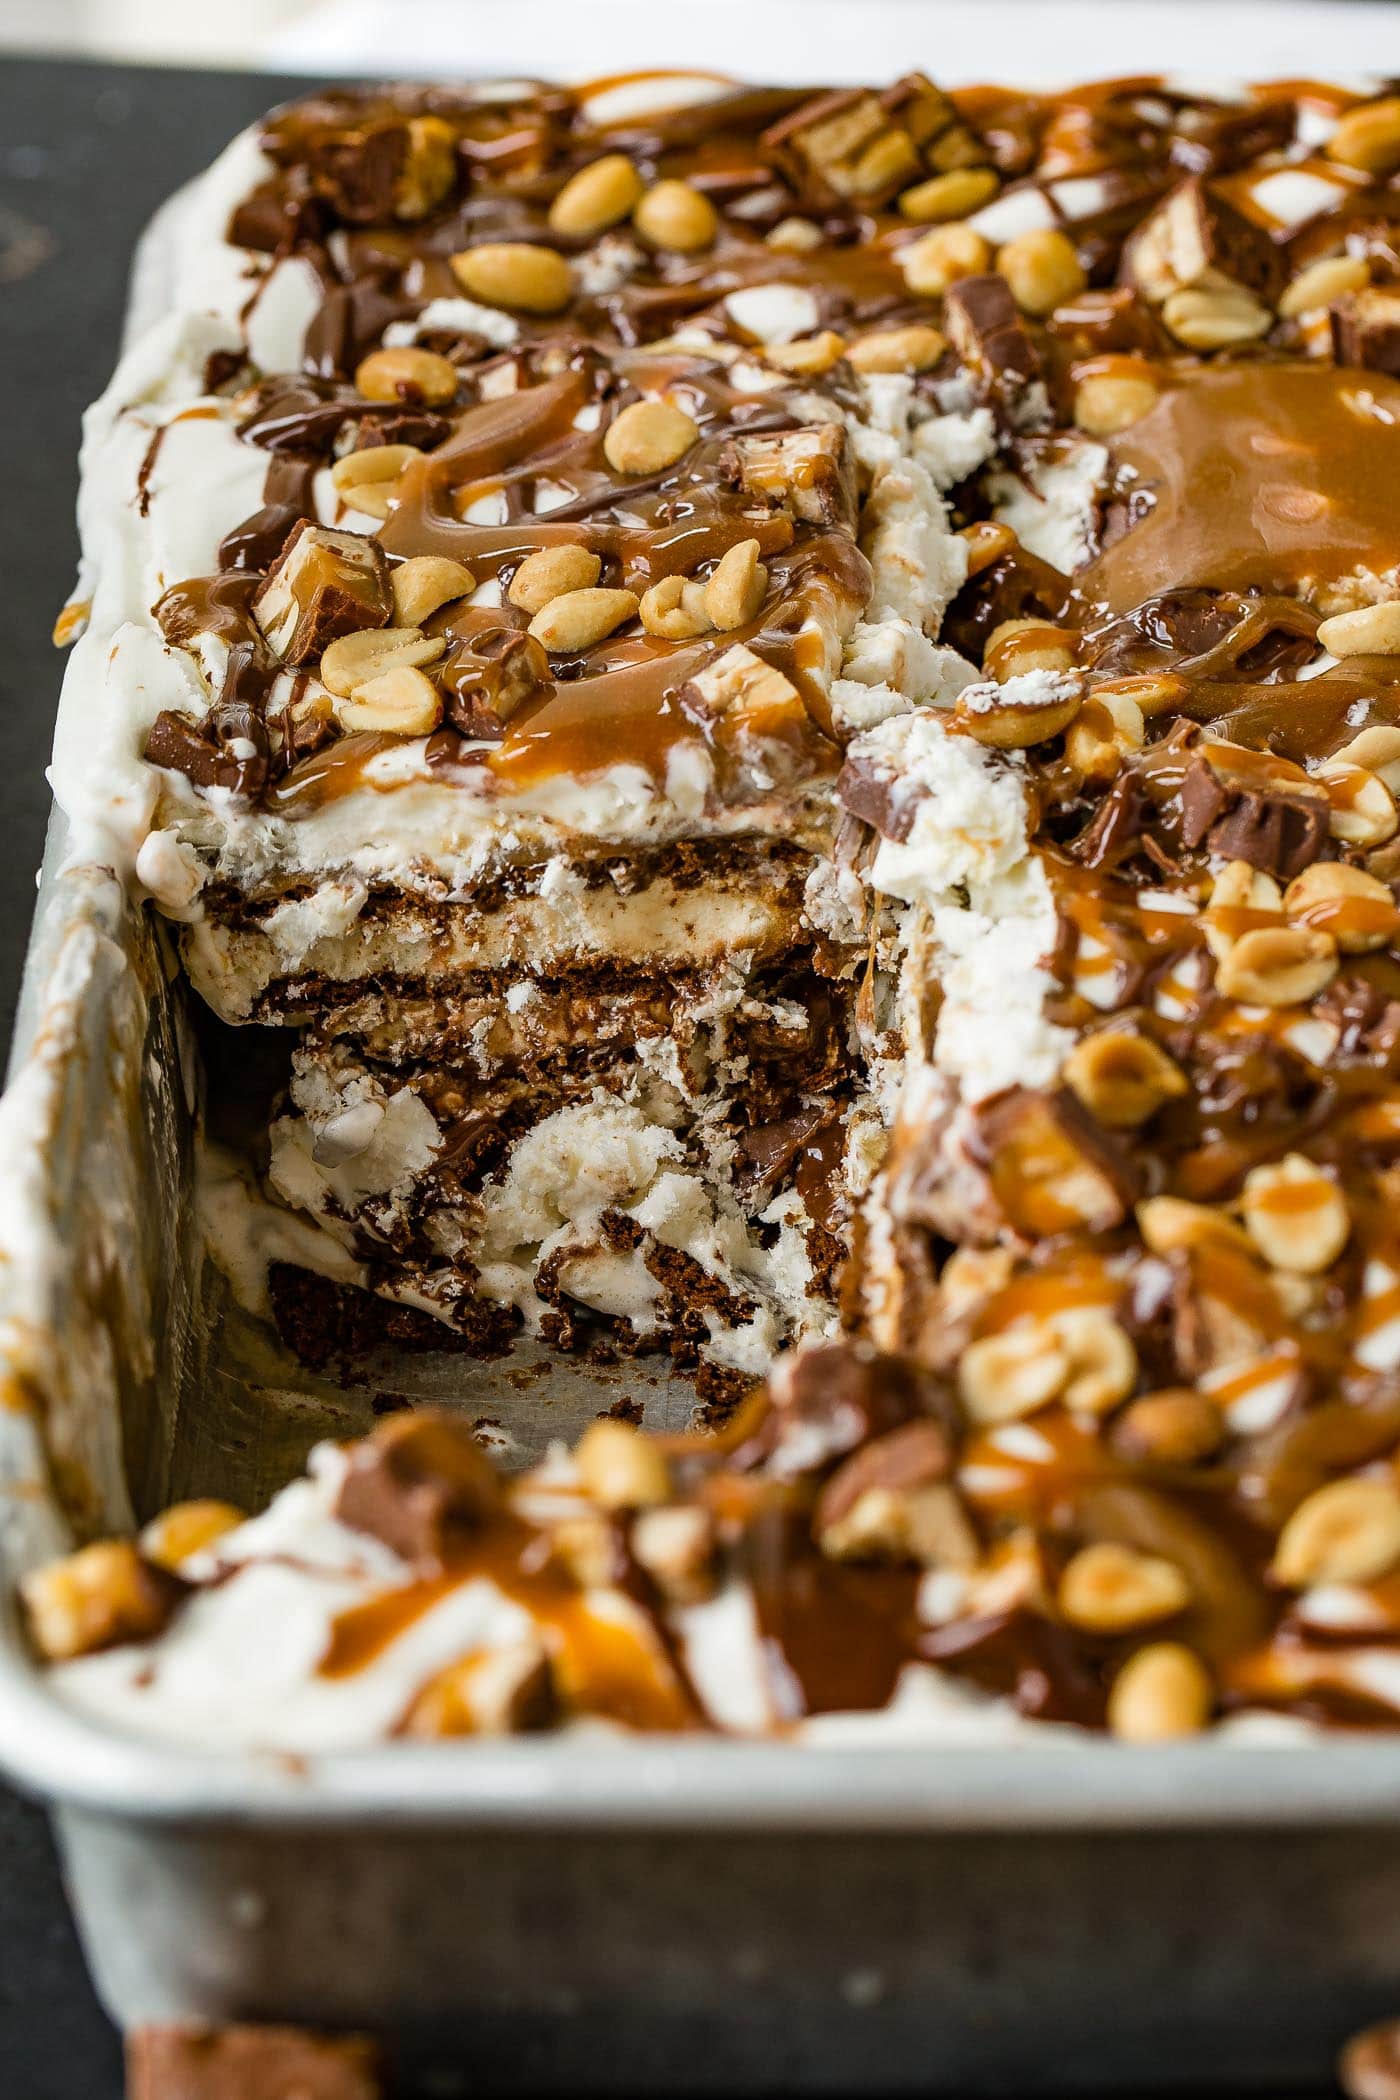 A pan of snickers ice cream cake with a piece removed. There are layers of ice cream, cake, fudge, caramel, whipped cream and candy bars. The top is drizzled with hot fudge, caramel topping and salted peanuts.